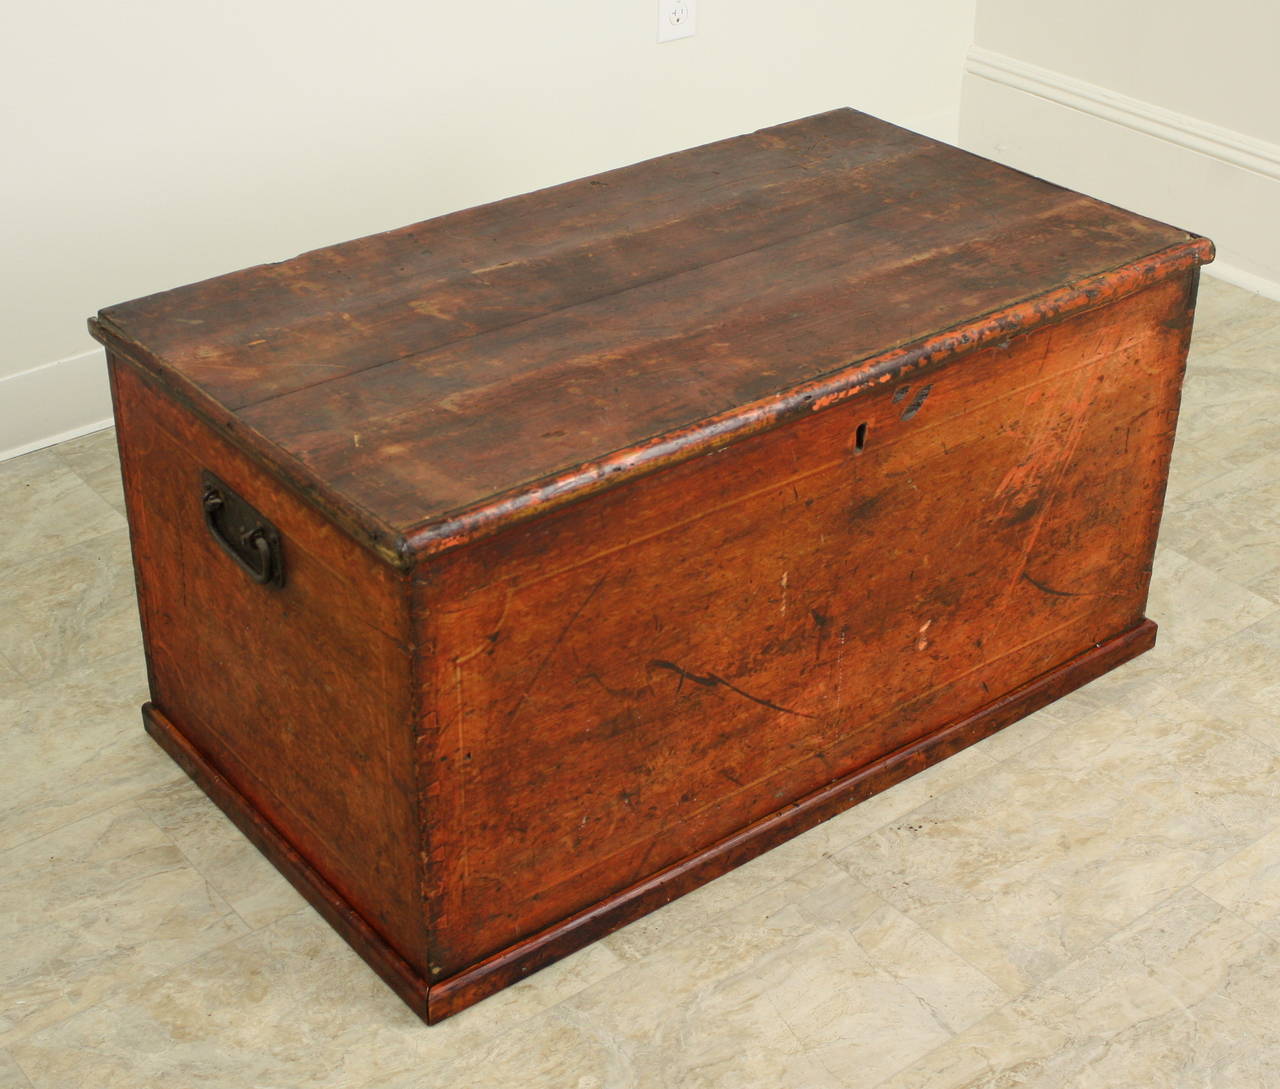 A great old blanket chest, carefully painted in faux dark wood, probably to simulate the look of a finer wood.  Interesting grain paint, and a most interesting painted inner boarder on the front and sides in the style of painted Regency furniture. 